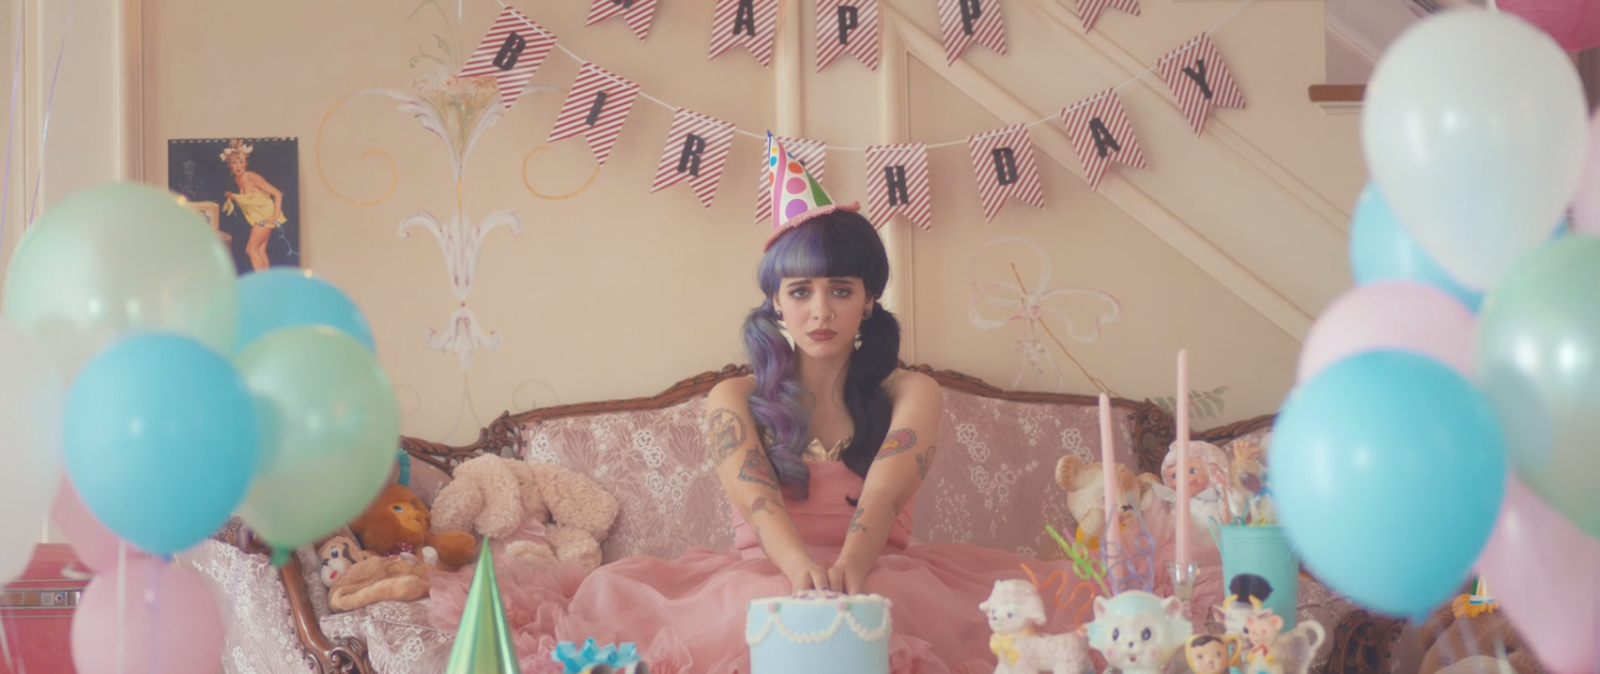 The Music Obsession New Video Pity Party By Melanie Martinez